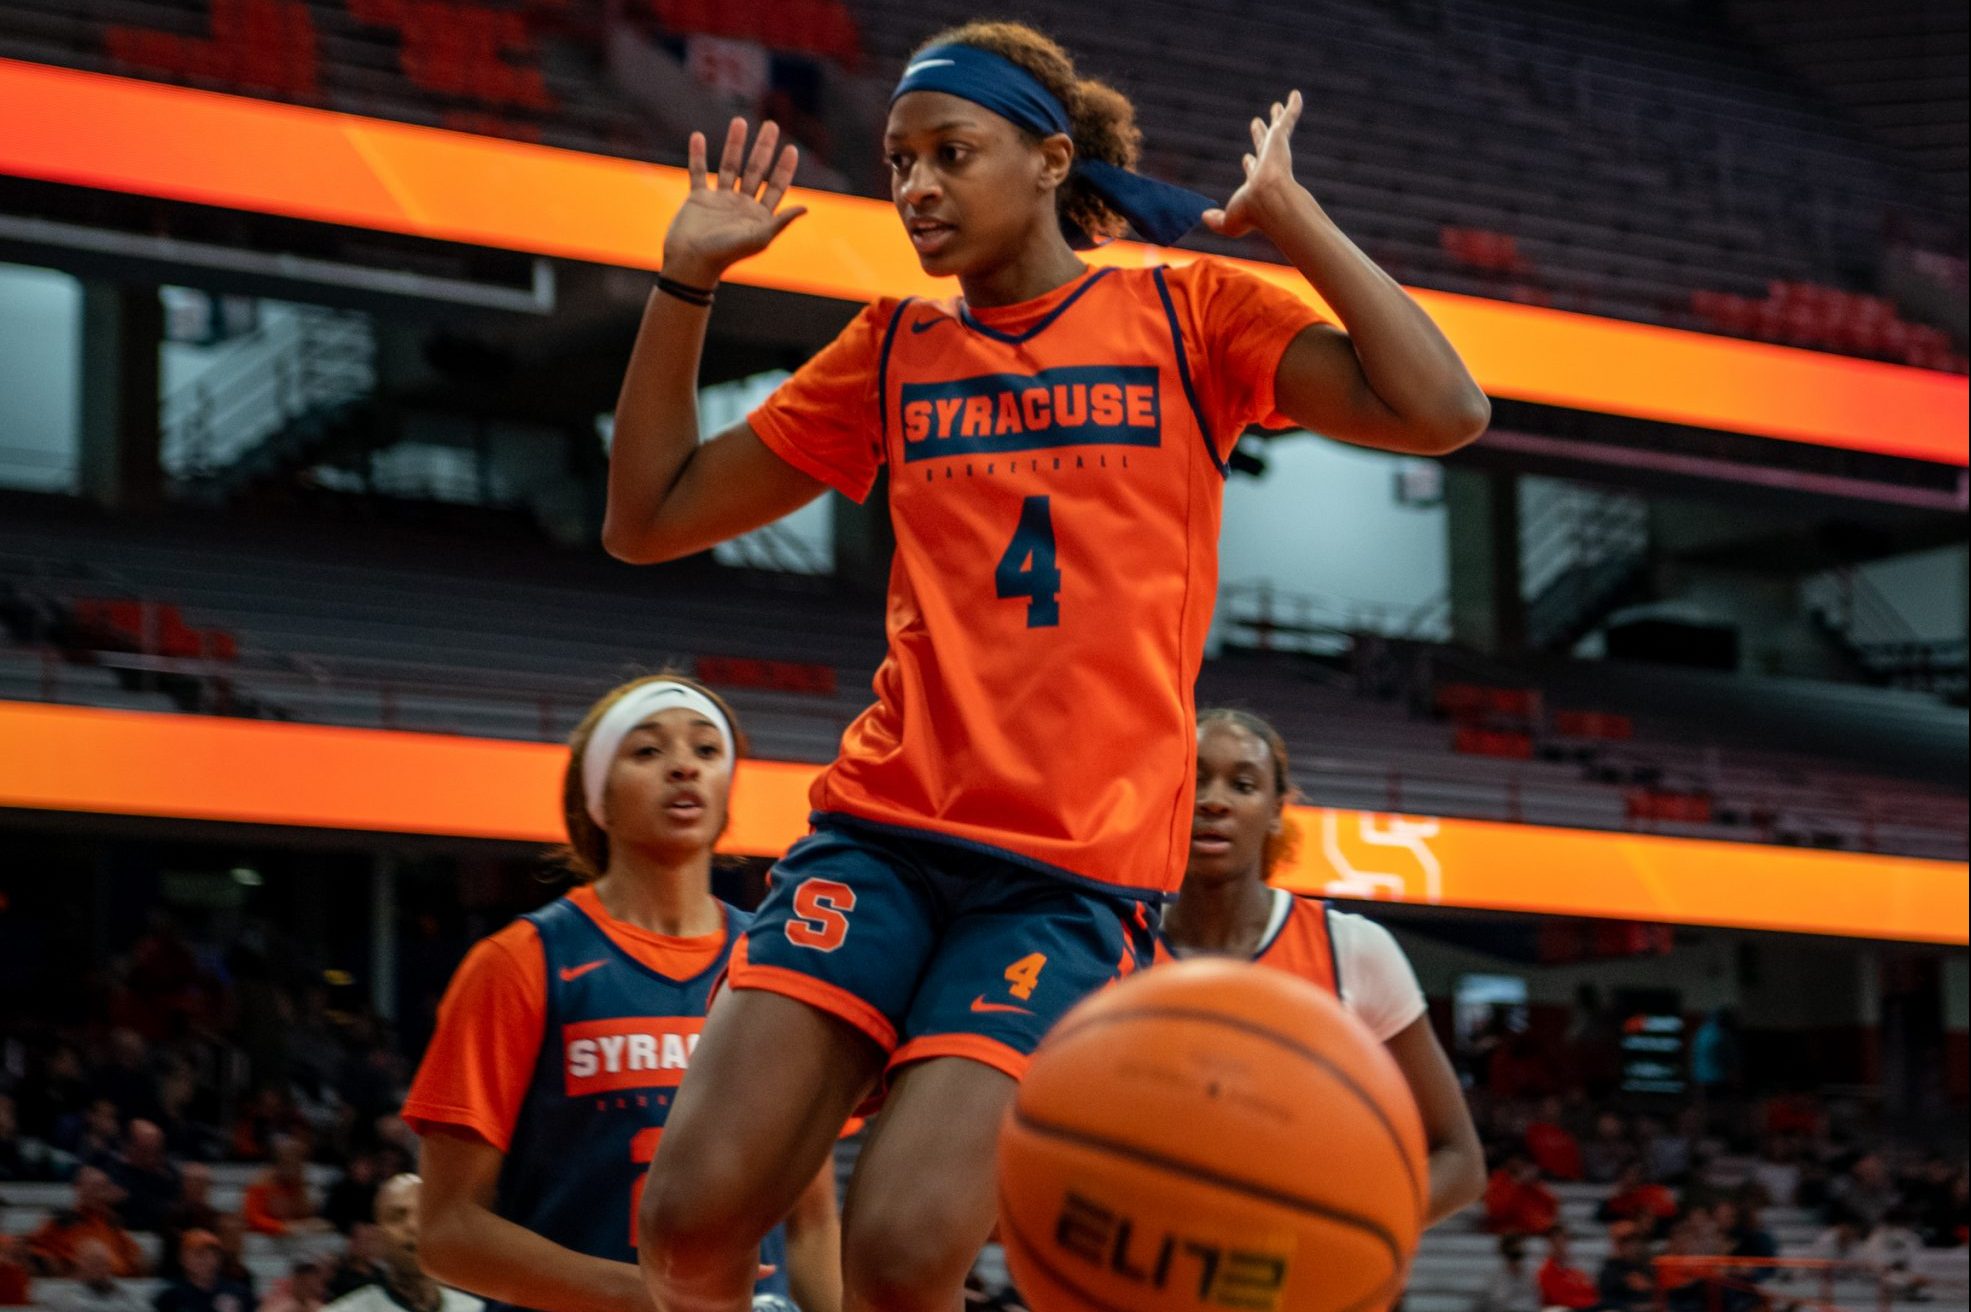 Redshirt junior, Teisha Hyman, after making a layup during the women's basketball scrimmage, at the Orange Tip Off fan event. Photo by Ryan Brady. 10/14/22